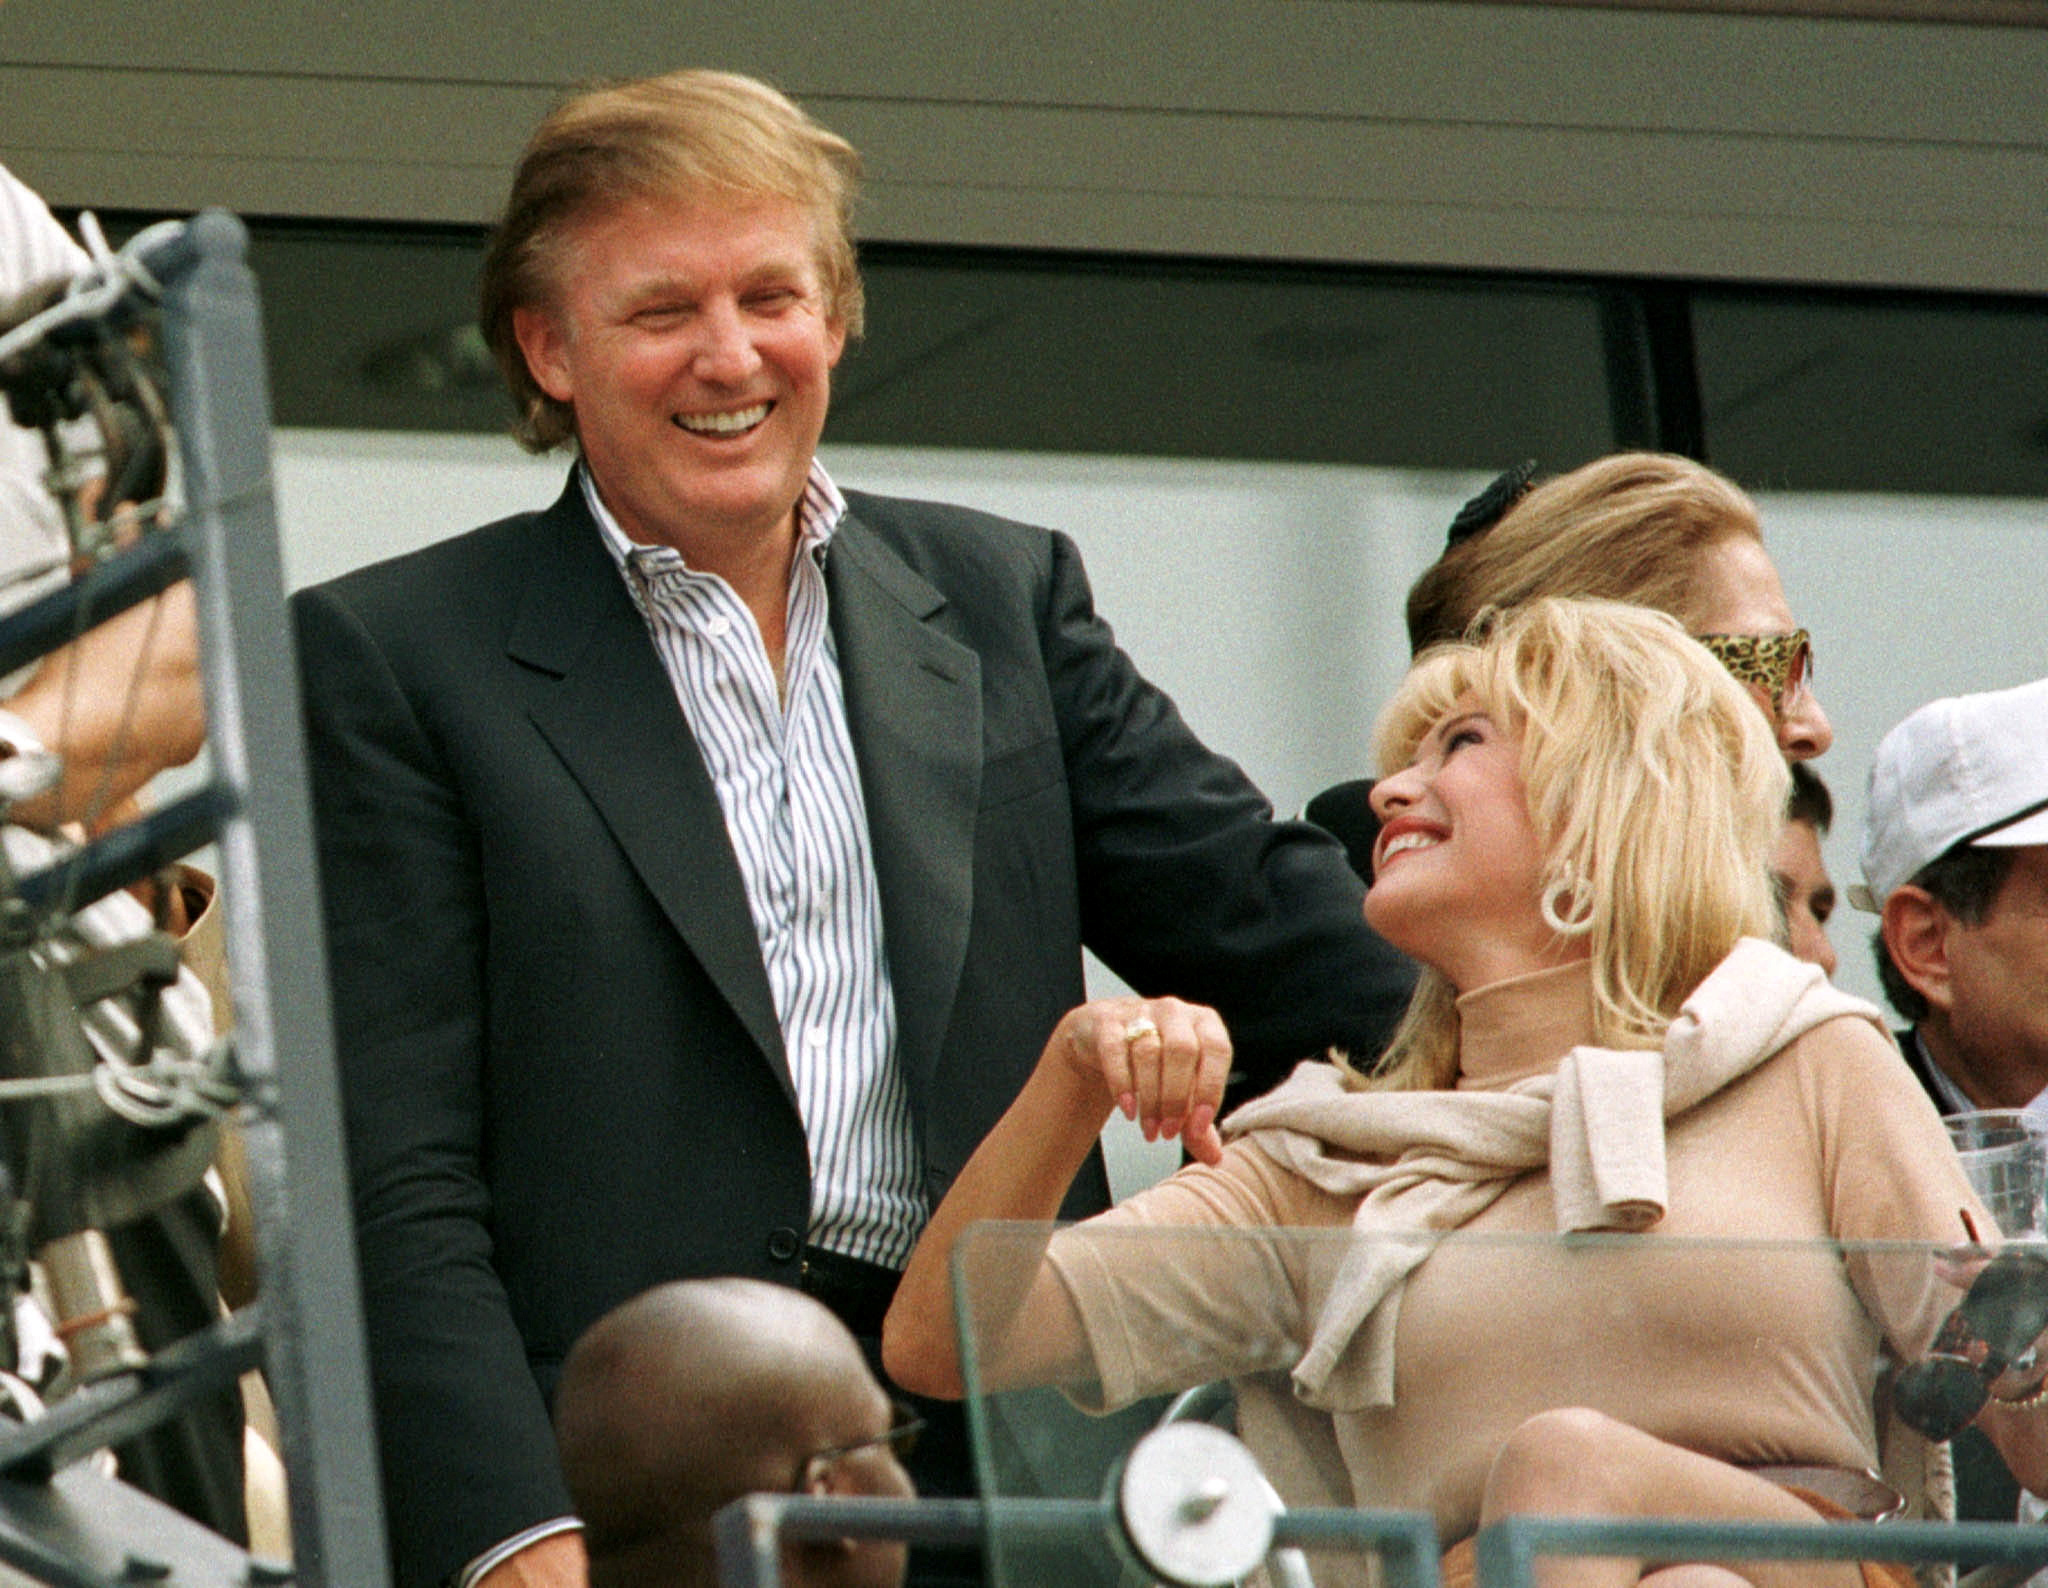 Archive photo: Donald Trump with Ivana Trump in 1997 (REUTERS/Mike Blake)